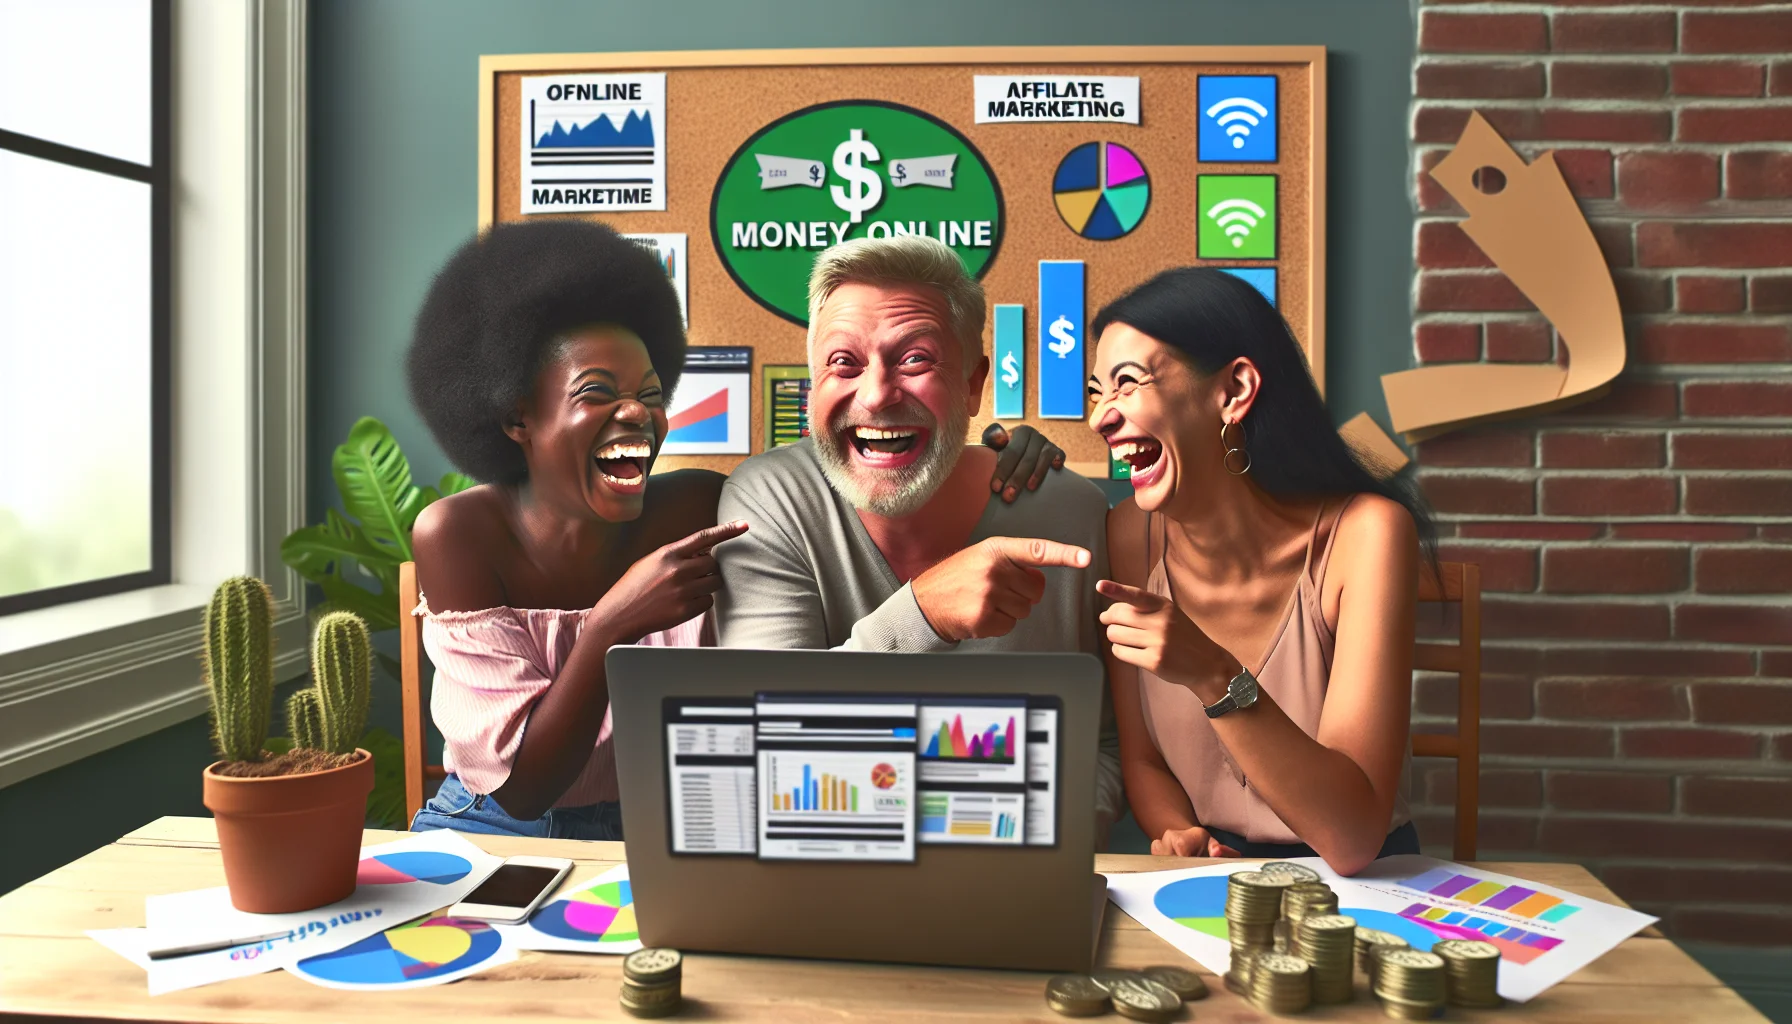 Generate a humorous, realistic image where a Caucasian middle-aged man and a young Black woman are involved in an enticing scenario about making money online. They are sitting in a home office, with laptops displaying colorful graphs and charts about online revenues. On the wall, a sign reads 'Affiliate Marketing'. They’re having a light-hearted conversation, laughing together while pointing at a screen showing a large dollar sign. Include elements expressing the digital nature of their enterprise such as WiFi icons and digital clocks.